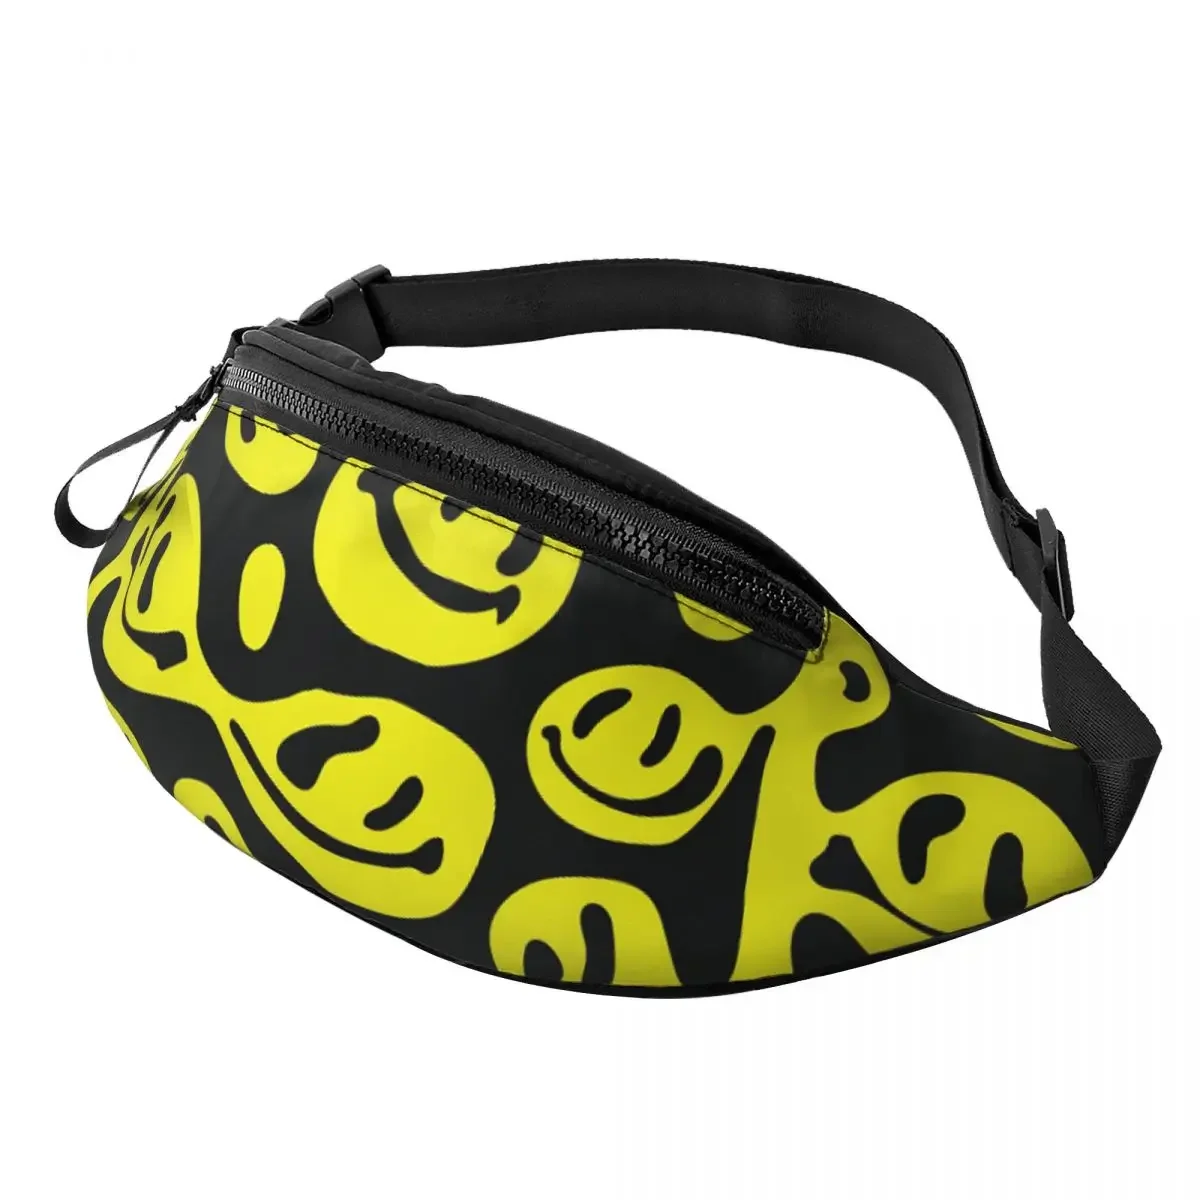 

Yellow Melted Smiley Faces Printed Waist Bags Merry Christmas Unisex Fanny Pack Fashion Sport Banana Bags Belt Pouch